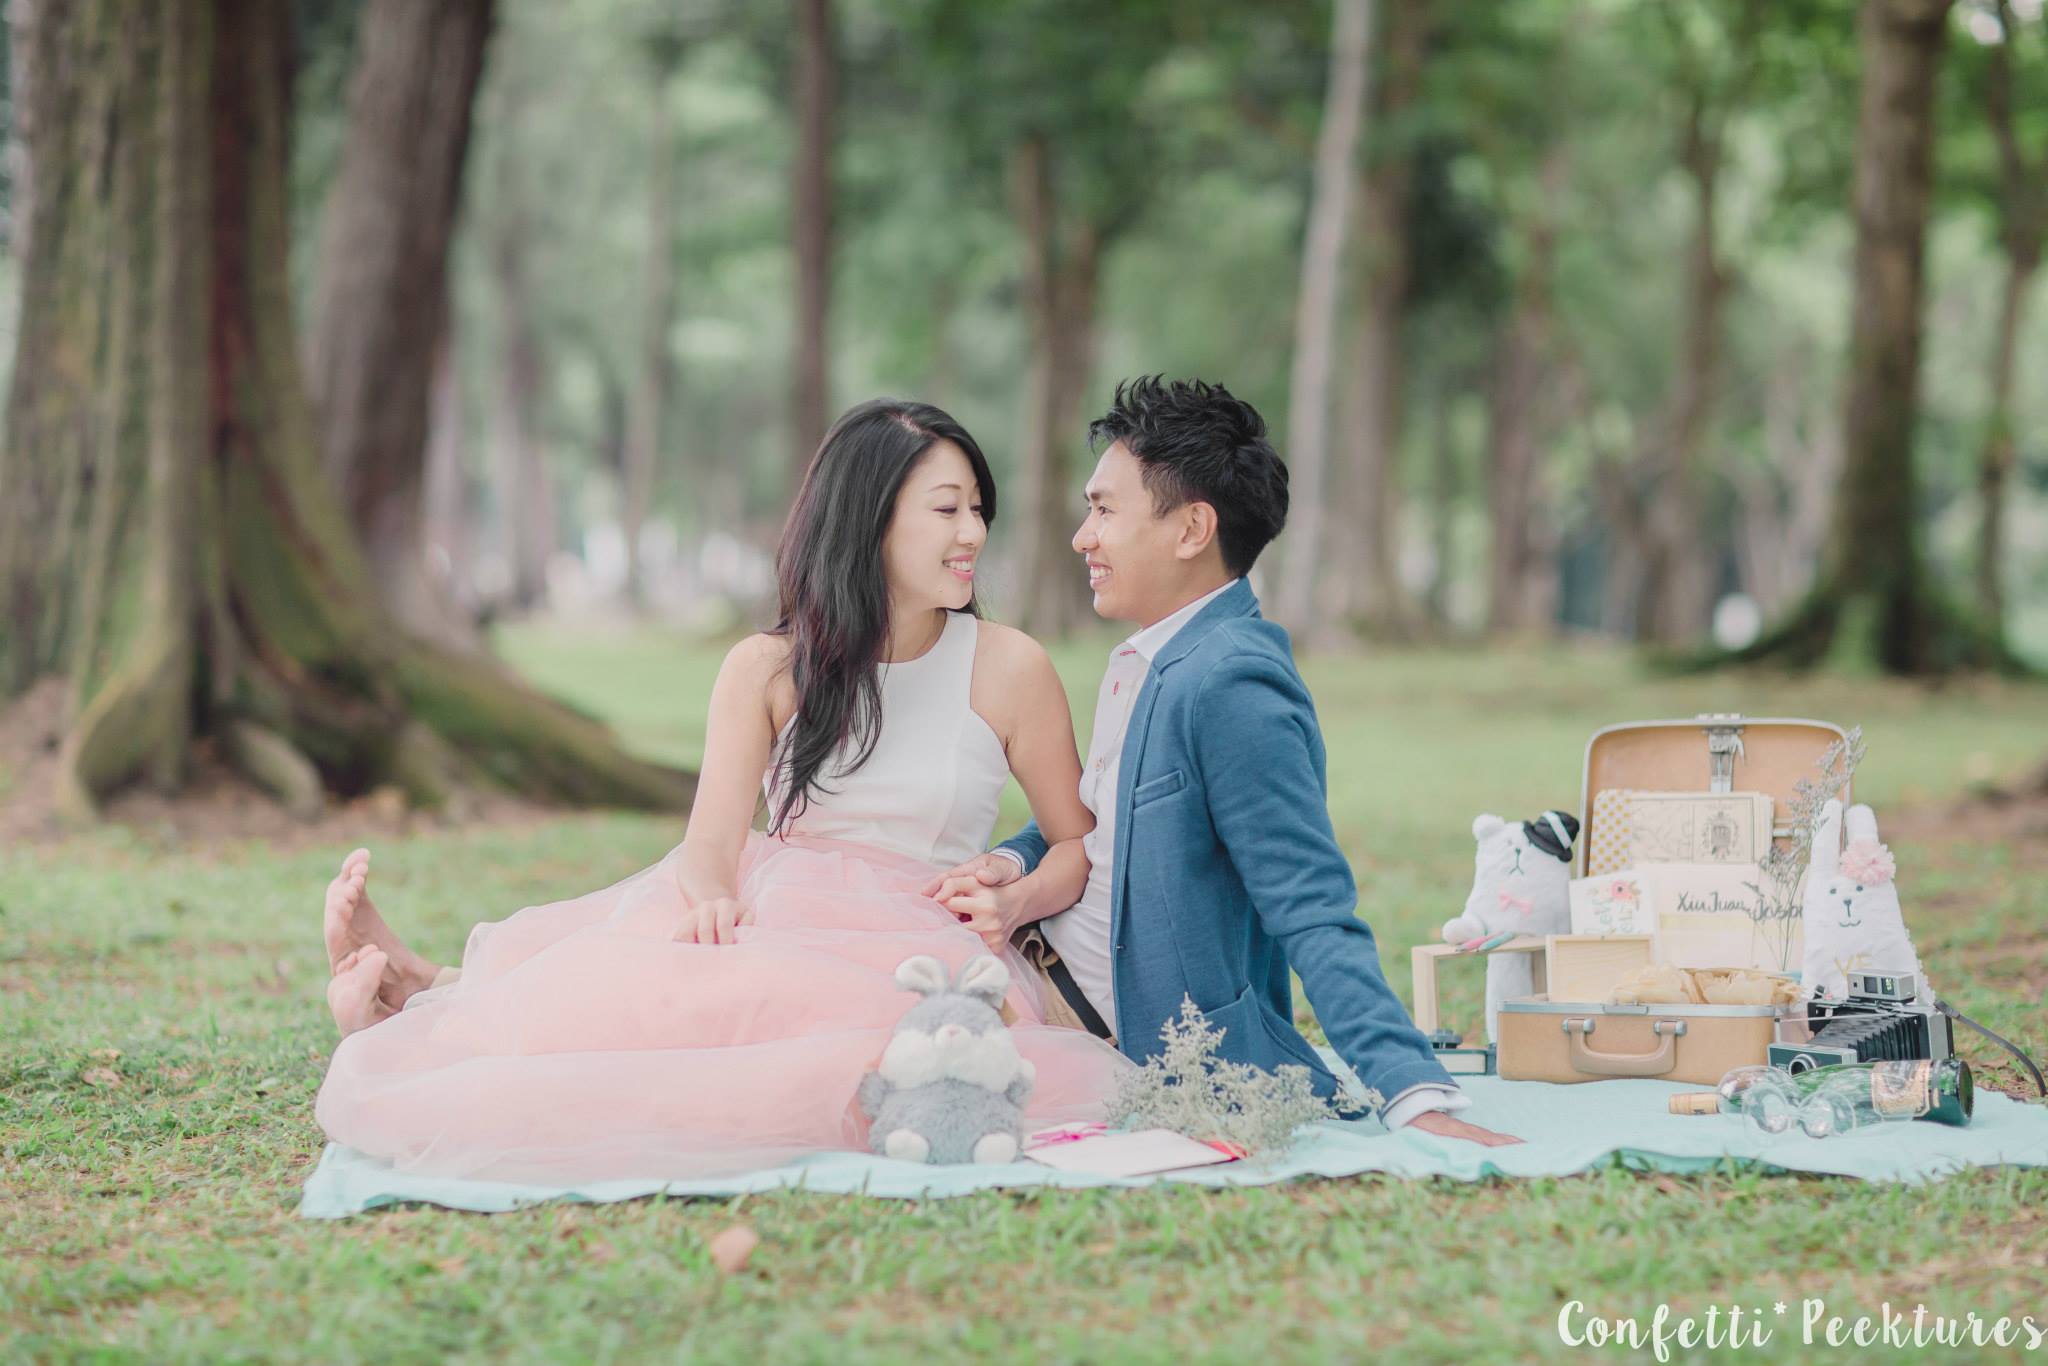 Pre-wedding Photo Shoot Guide: 5 Tips for a Relaxing Outdoor Shoot in Singapore - Blog 